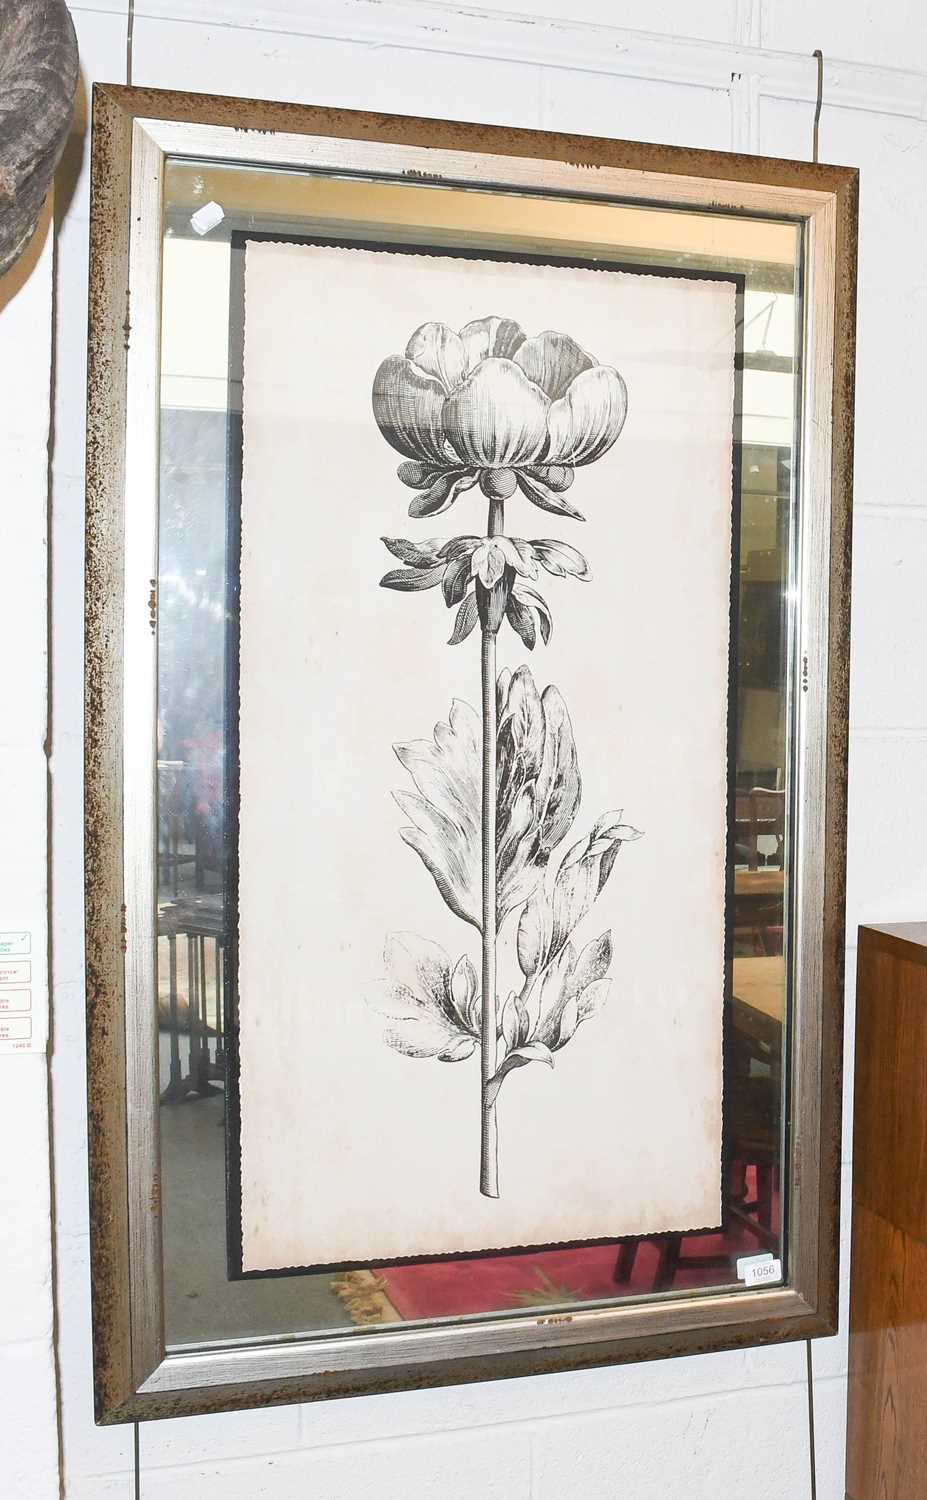 Set of Four Decorative John-Richard Botanical Prints in Mirrored Frames, 91cm by 45.5cm (4) - Image 5 of 5